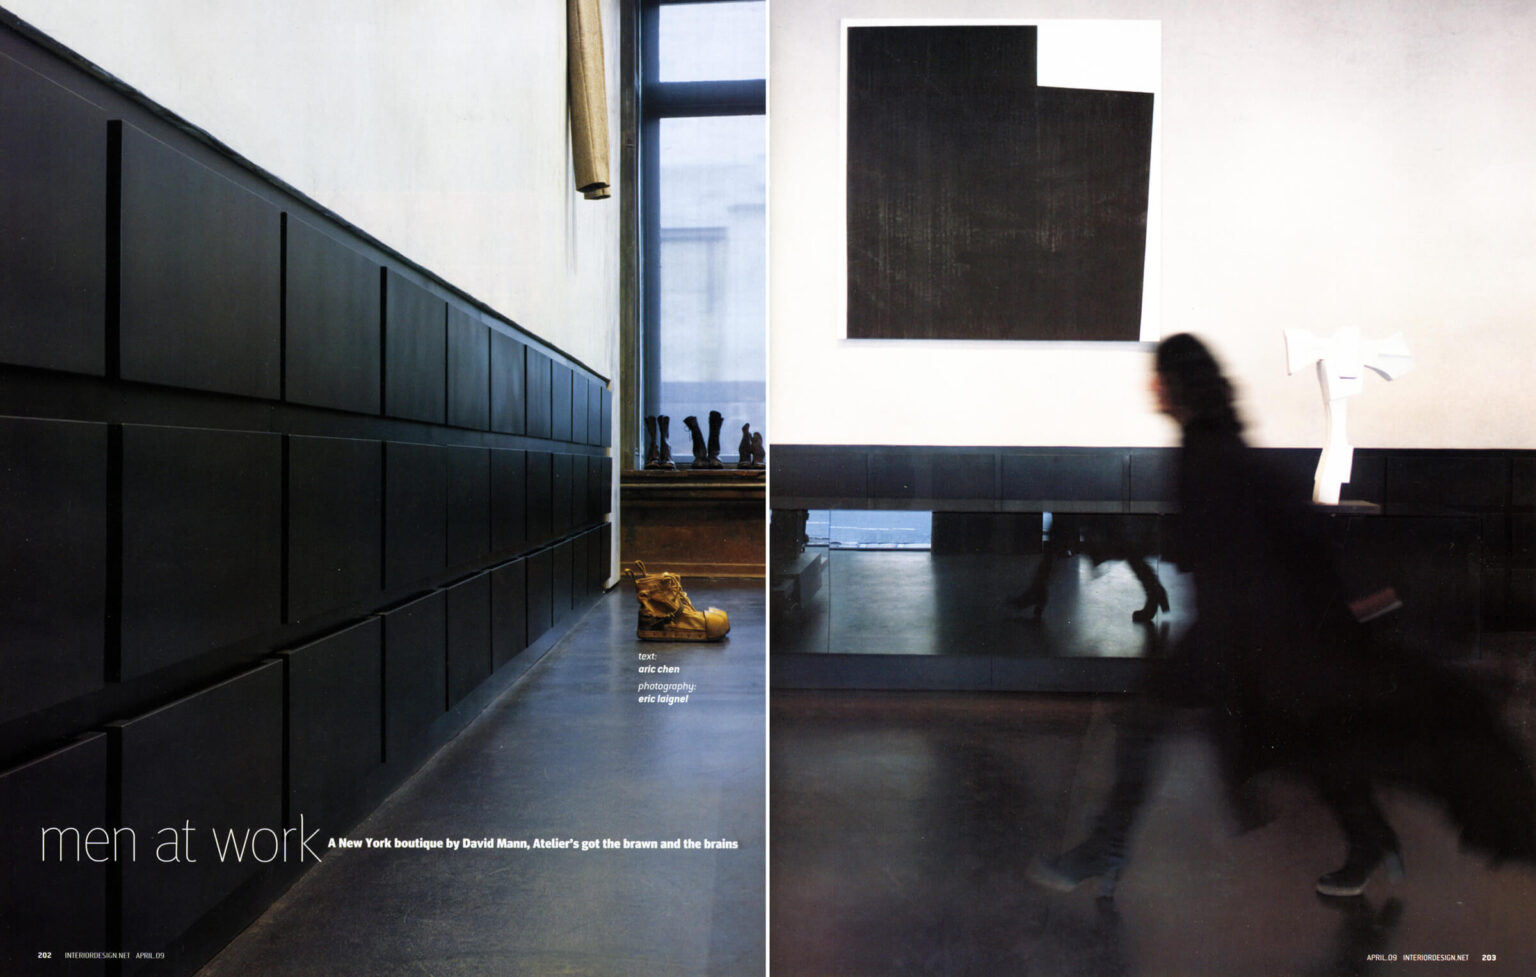 A double page spread of a story titled Men At Work in Interior Design magazine featuring men's store Atelier.